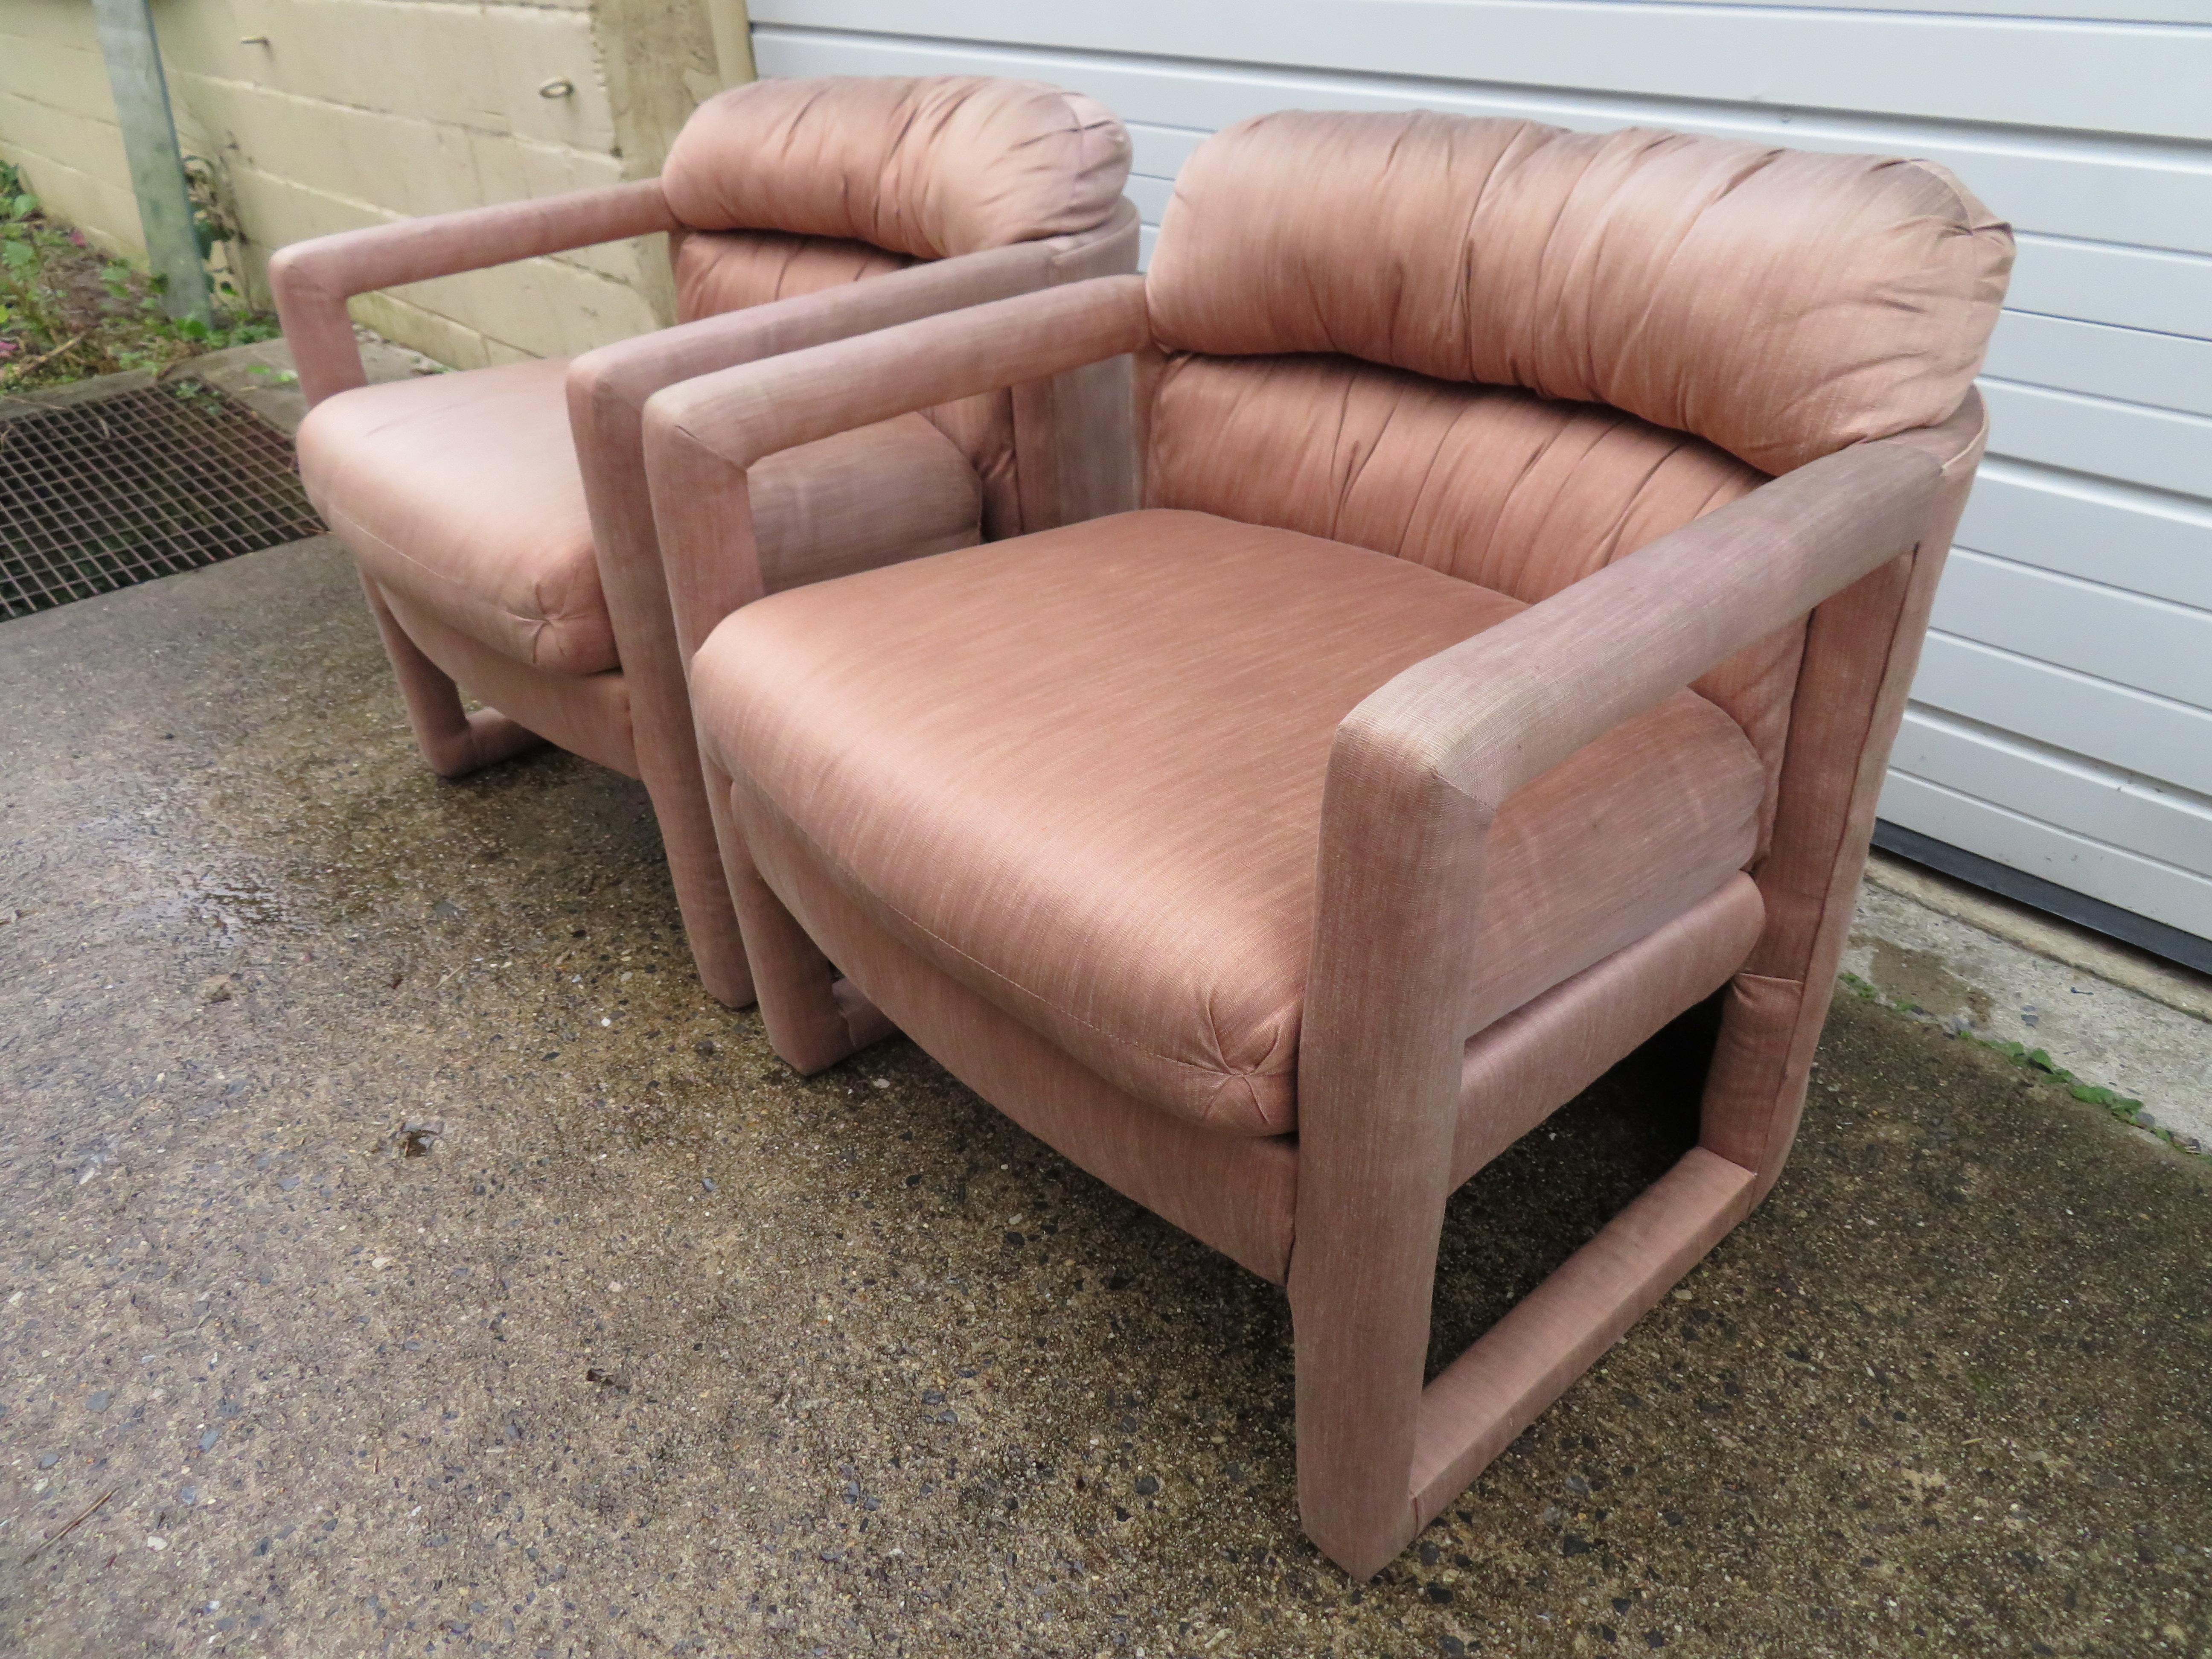 Fantastic Pair of Milo Baughman Style Upholstered Lounge Chairs, Midcentury In Good Condition For Sale In Pemberton, NJ